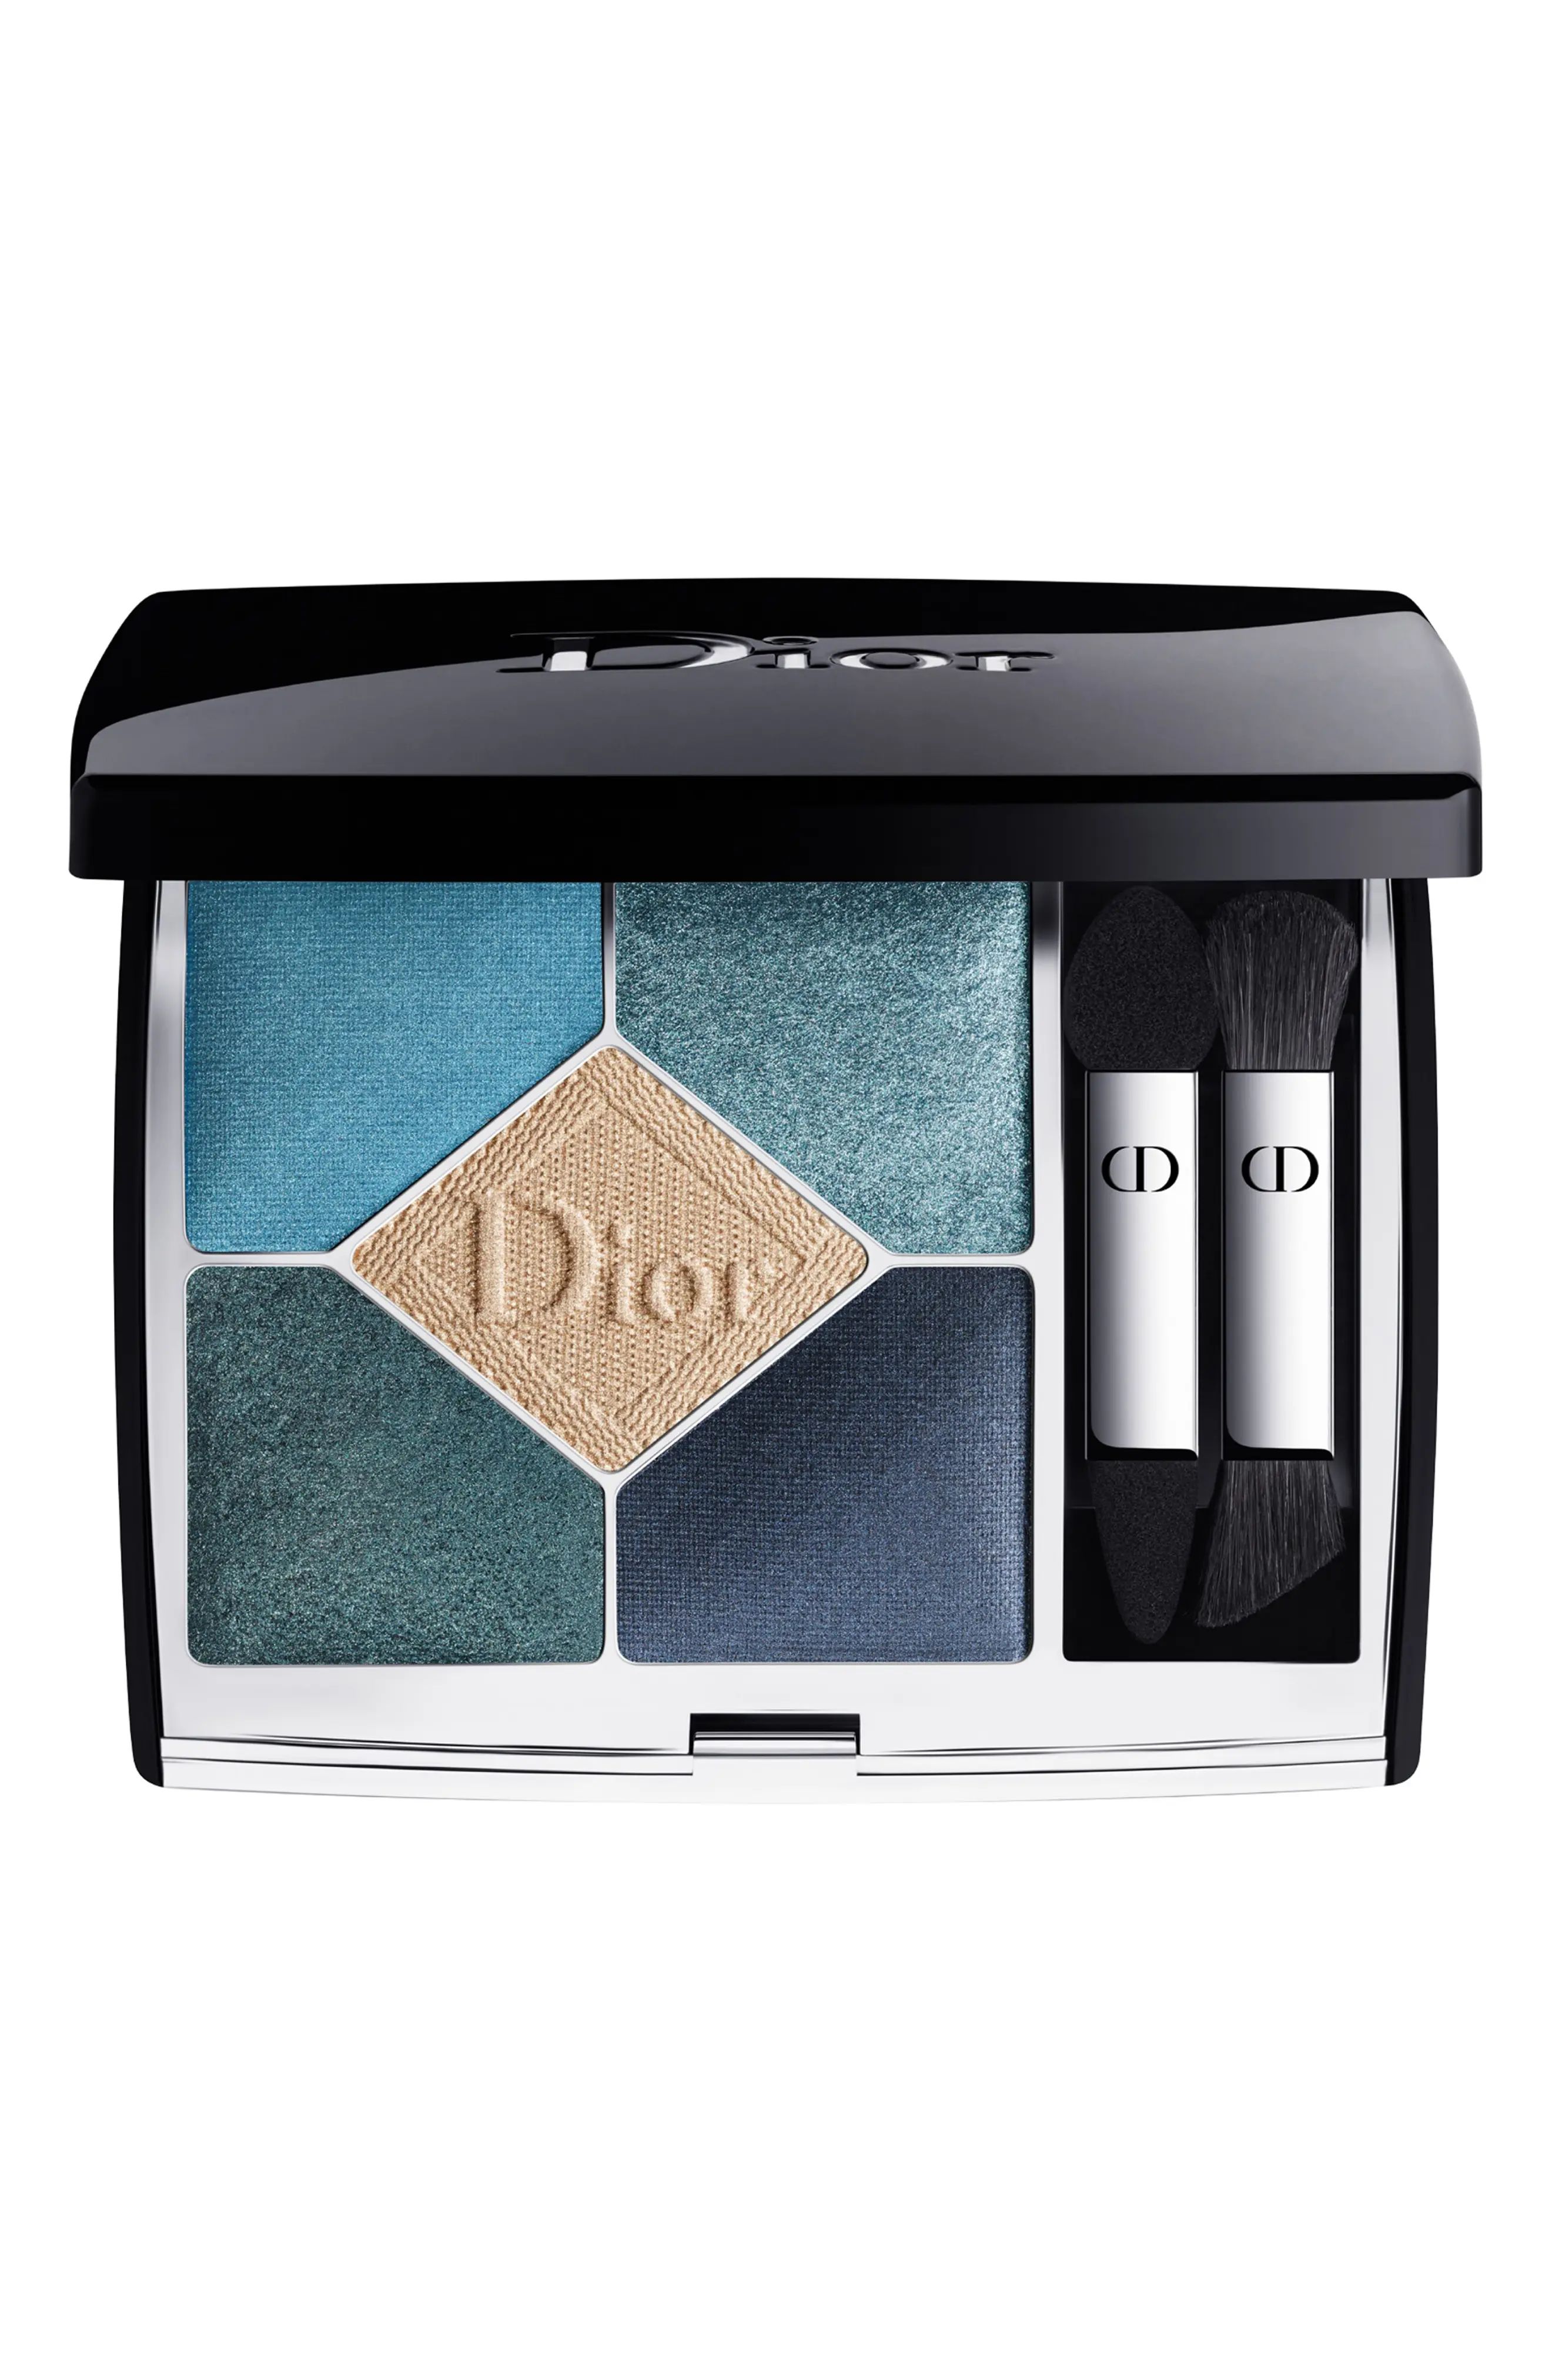 Dior 5 Couleurs Couture Eyeshadow Palette - 279 Denim | Nordstrom